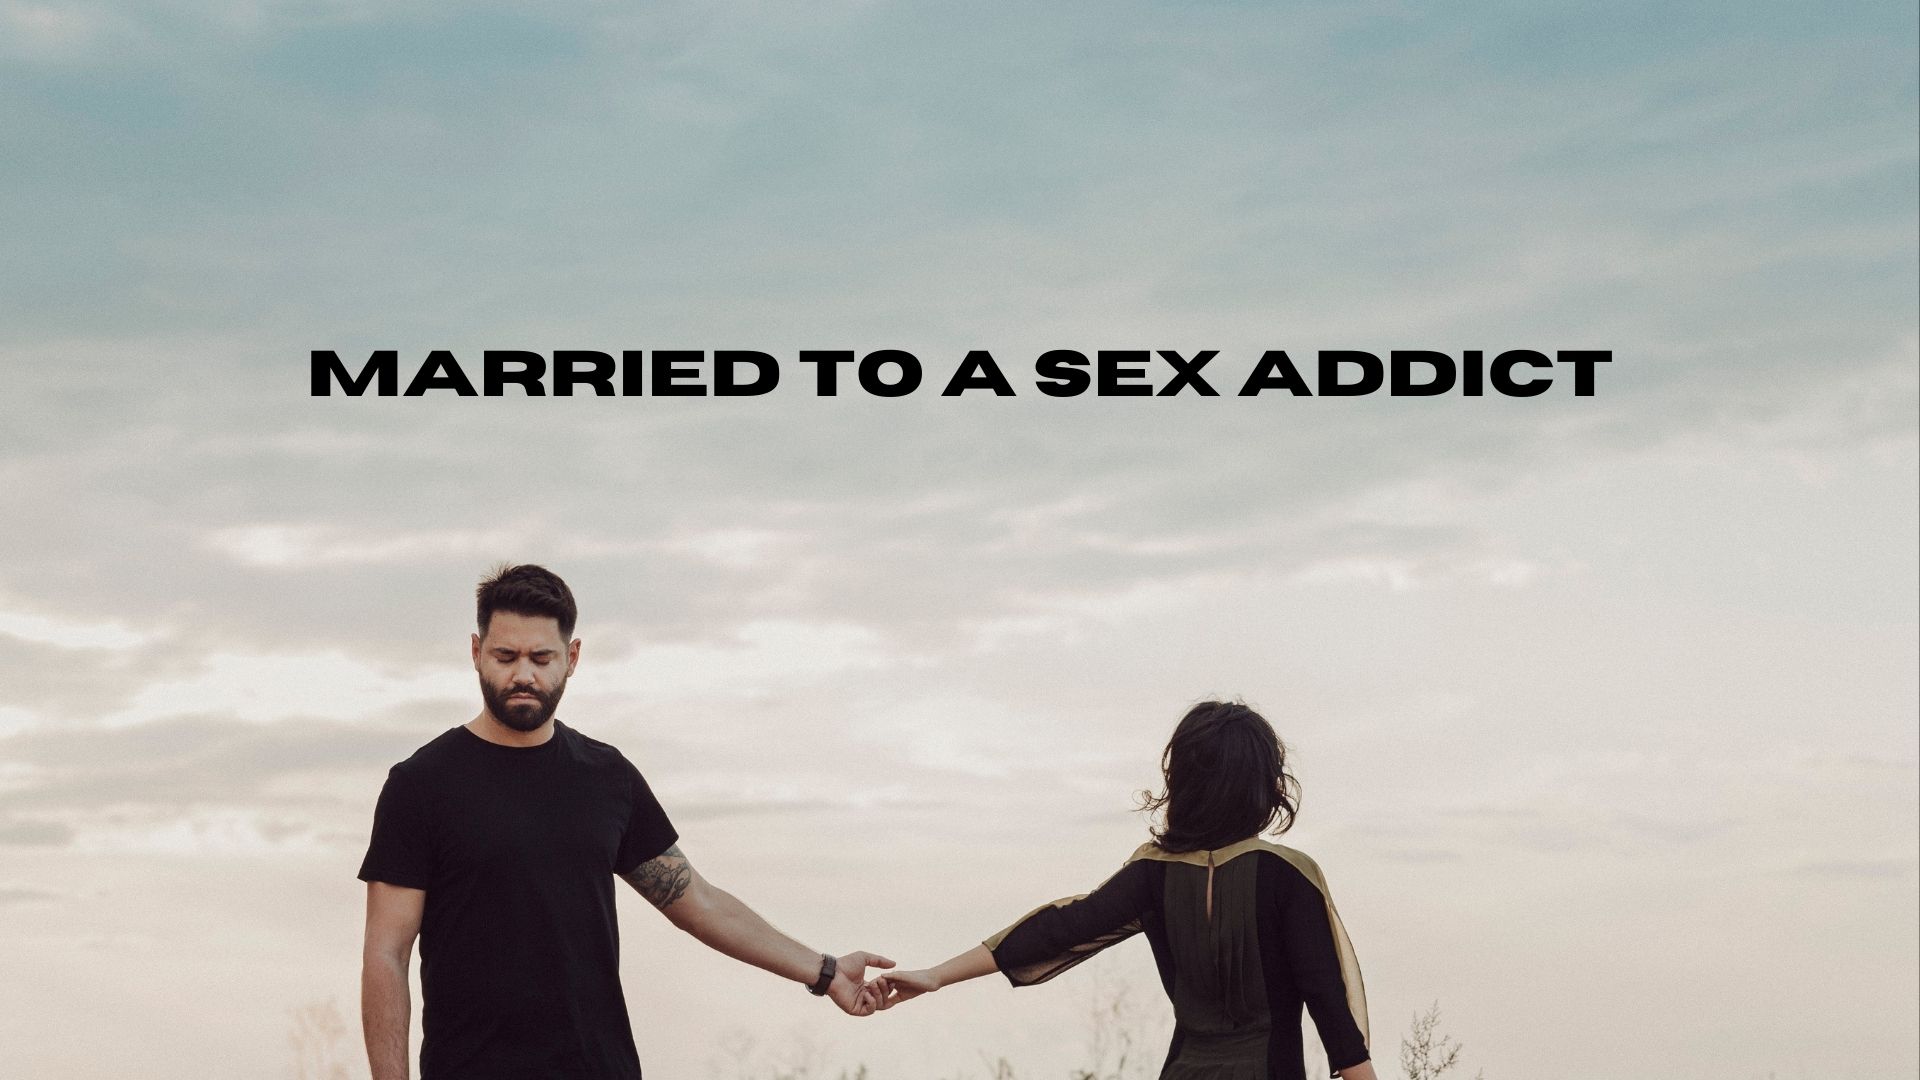 being married to a sex addict Xxx Photos